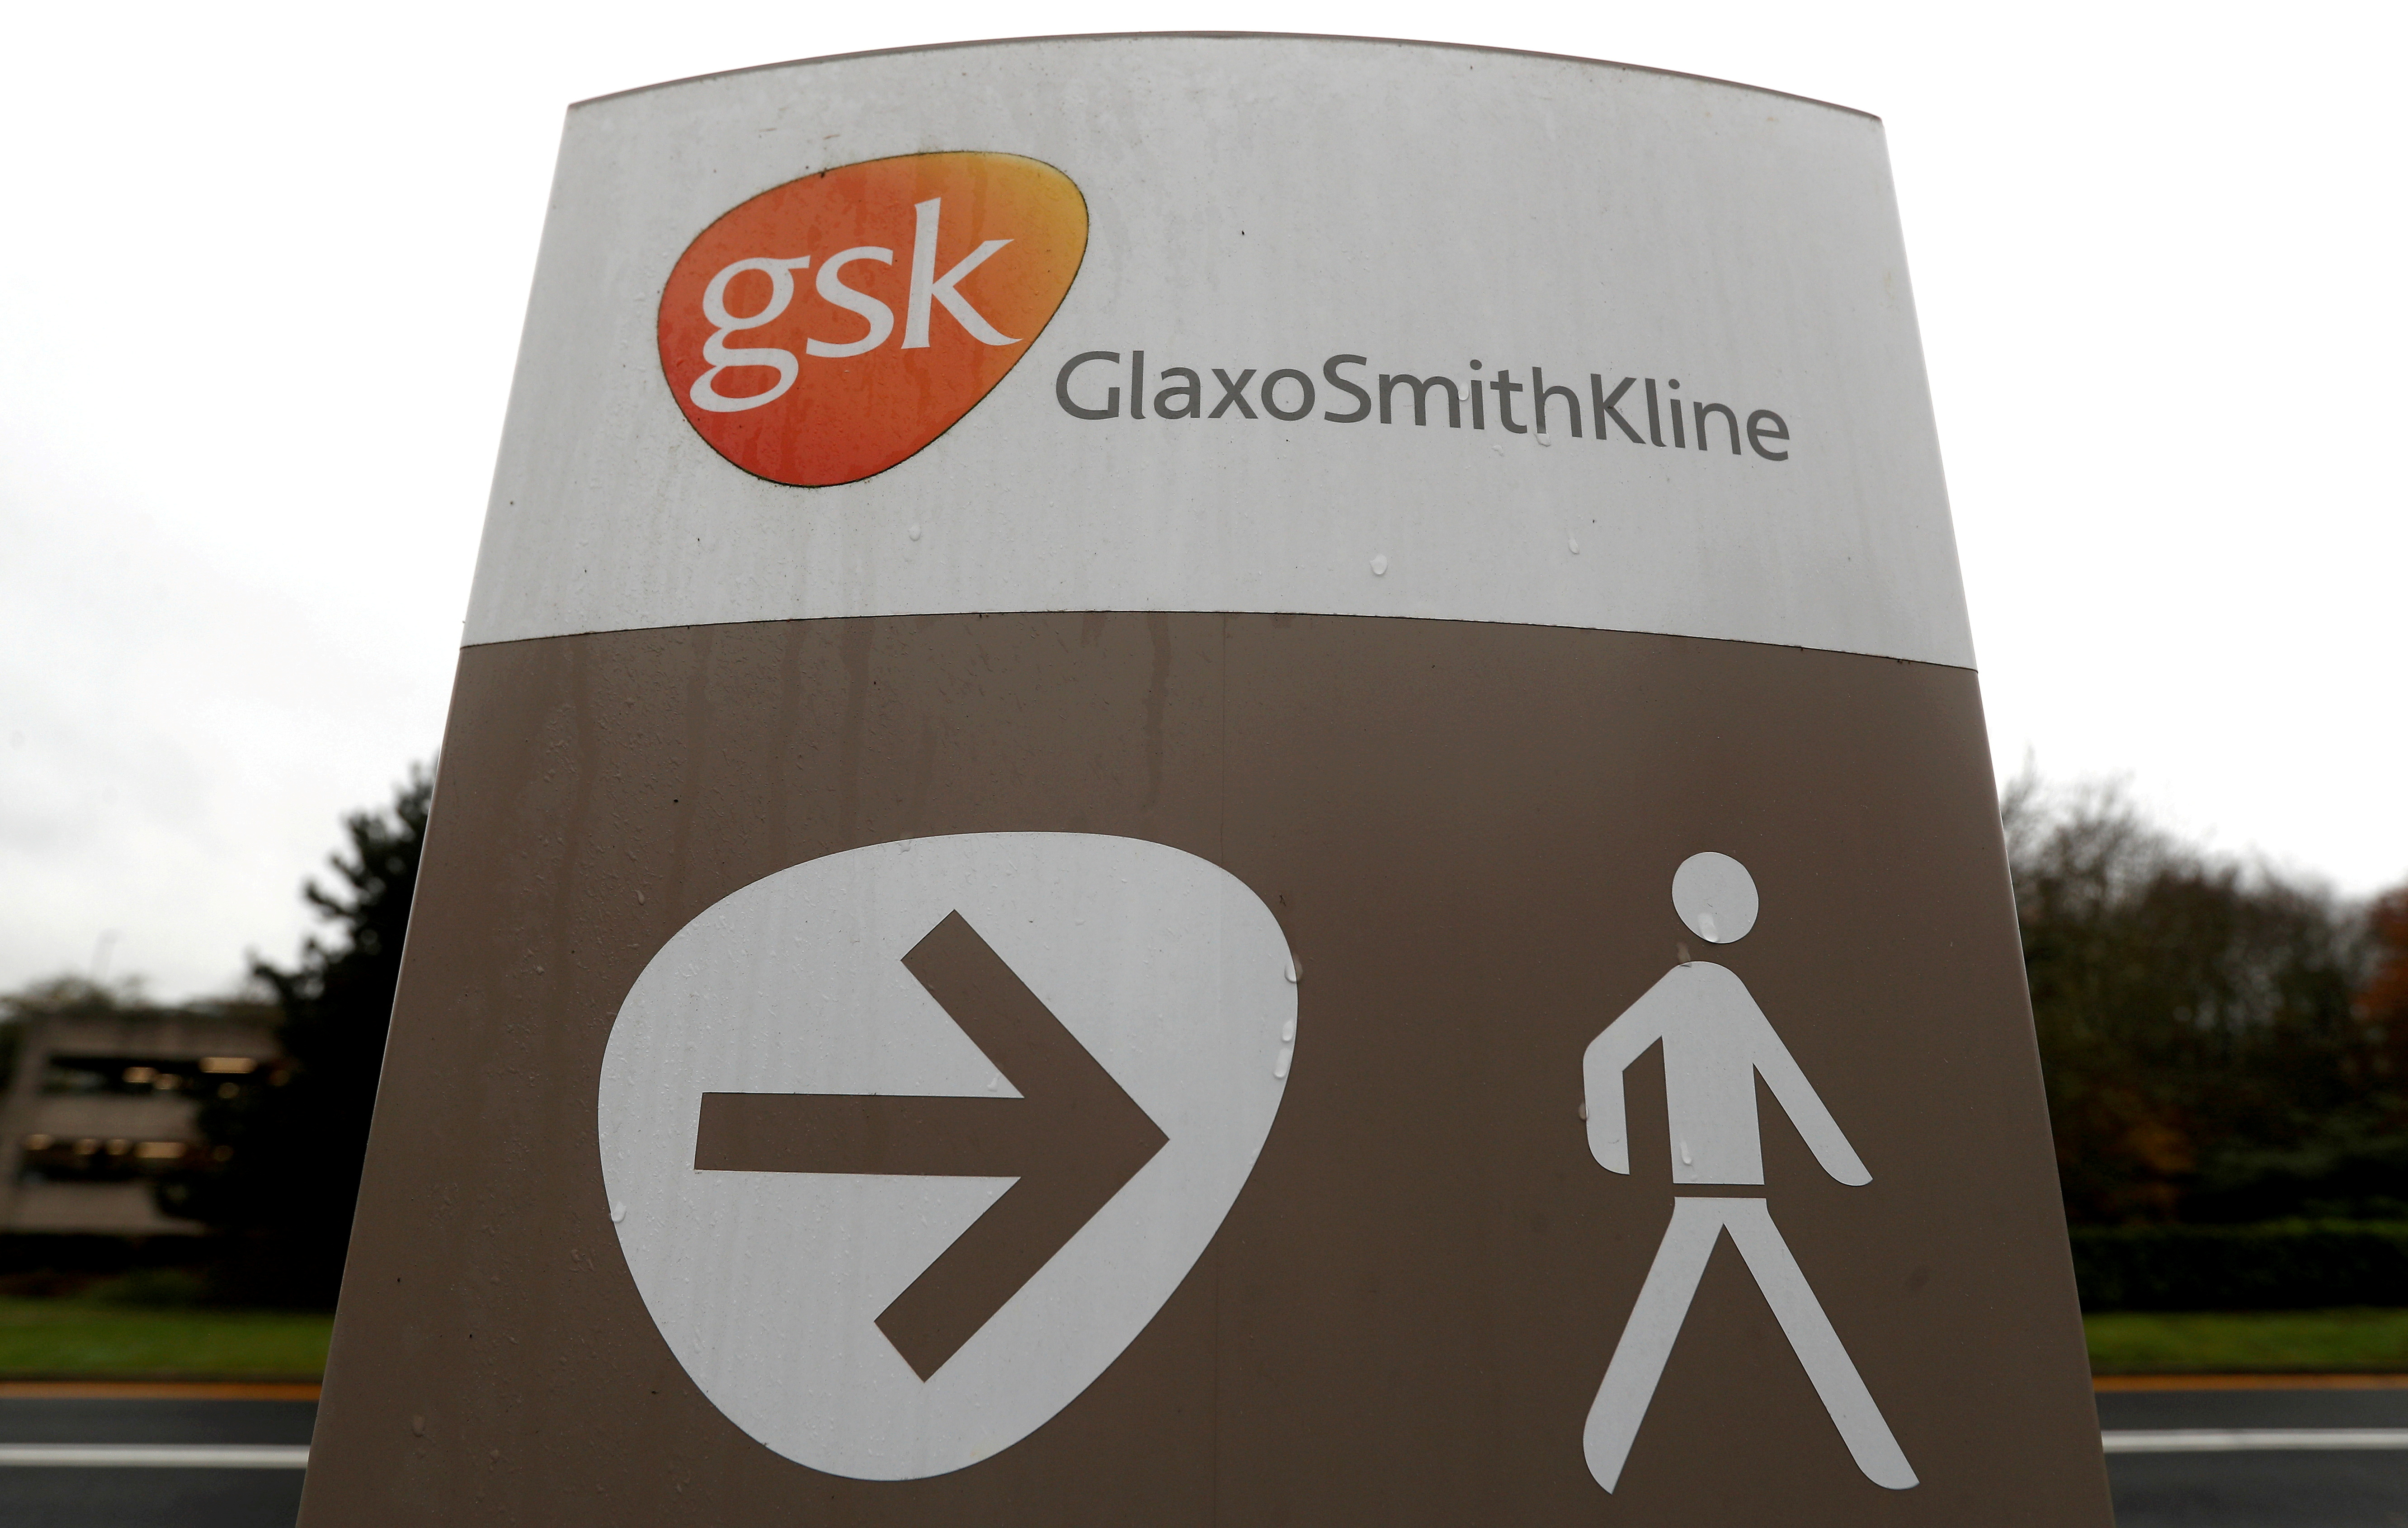 GlaxoSmithKline's (GSK) logo is seen at the pharmaceuticals company's research centre in Stevenage, Britain, November 26, 2019. REUTERS/Peter Nicholls